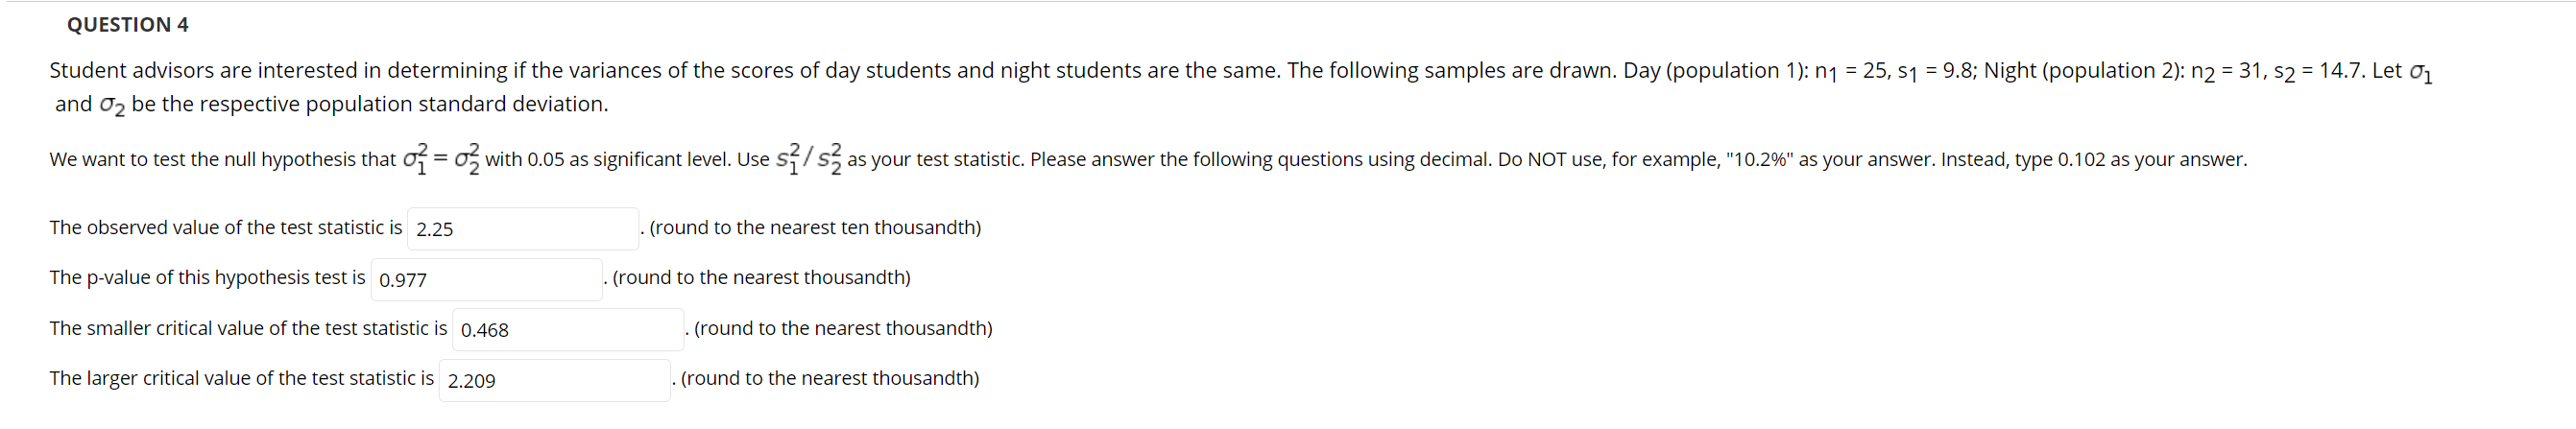 Student advisors are interested in determining if the variances of the scores of day students and night students are the same. The following samples are drawn. Day (population 1): n1 = 25, s1 = 9.8; Night (population 2): n2 = 31, s2 = 14.7. Let
and o2 be the respective population standard deviation.
We want to test the null hypothesis that of = o, with 0.05 as significant level. Use Sf/s5 as your test statistic. Please answer the following questions using decimal. Do NOT use, for example, "10.2%" as your answer. Instead, type 0.102 as your answer.
The observed value of the test statistic is 2.25
. (round to the nearest ten thousandth)
The p-value of this hypothesis test is 0.977
(round to the nearest thousandth)
The smaller critical value of the test statistic is 0.468
. (round to the nearest thousandth)
The larger critical value of the test statistic is 2.209
(round to the nearest thousandth)
